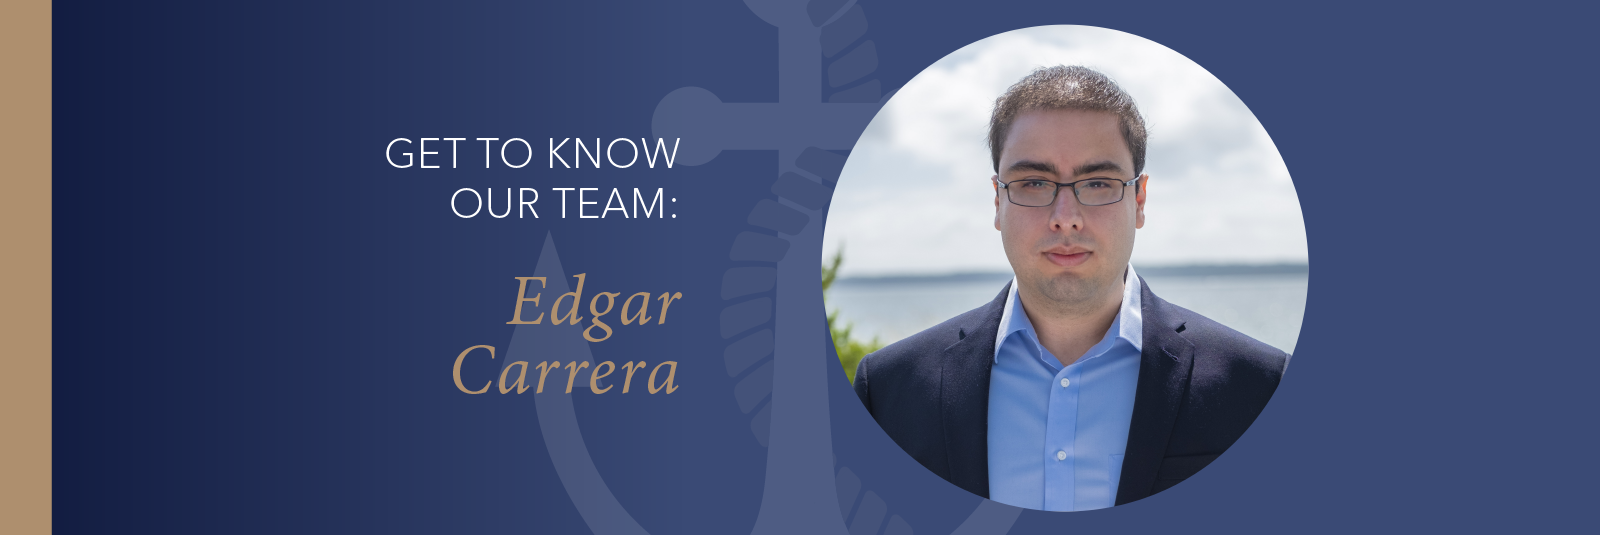 Get To Know Edgar Carrera - Falvey Insurance Group